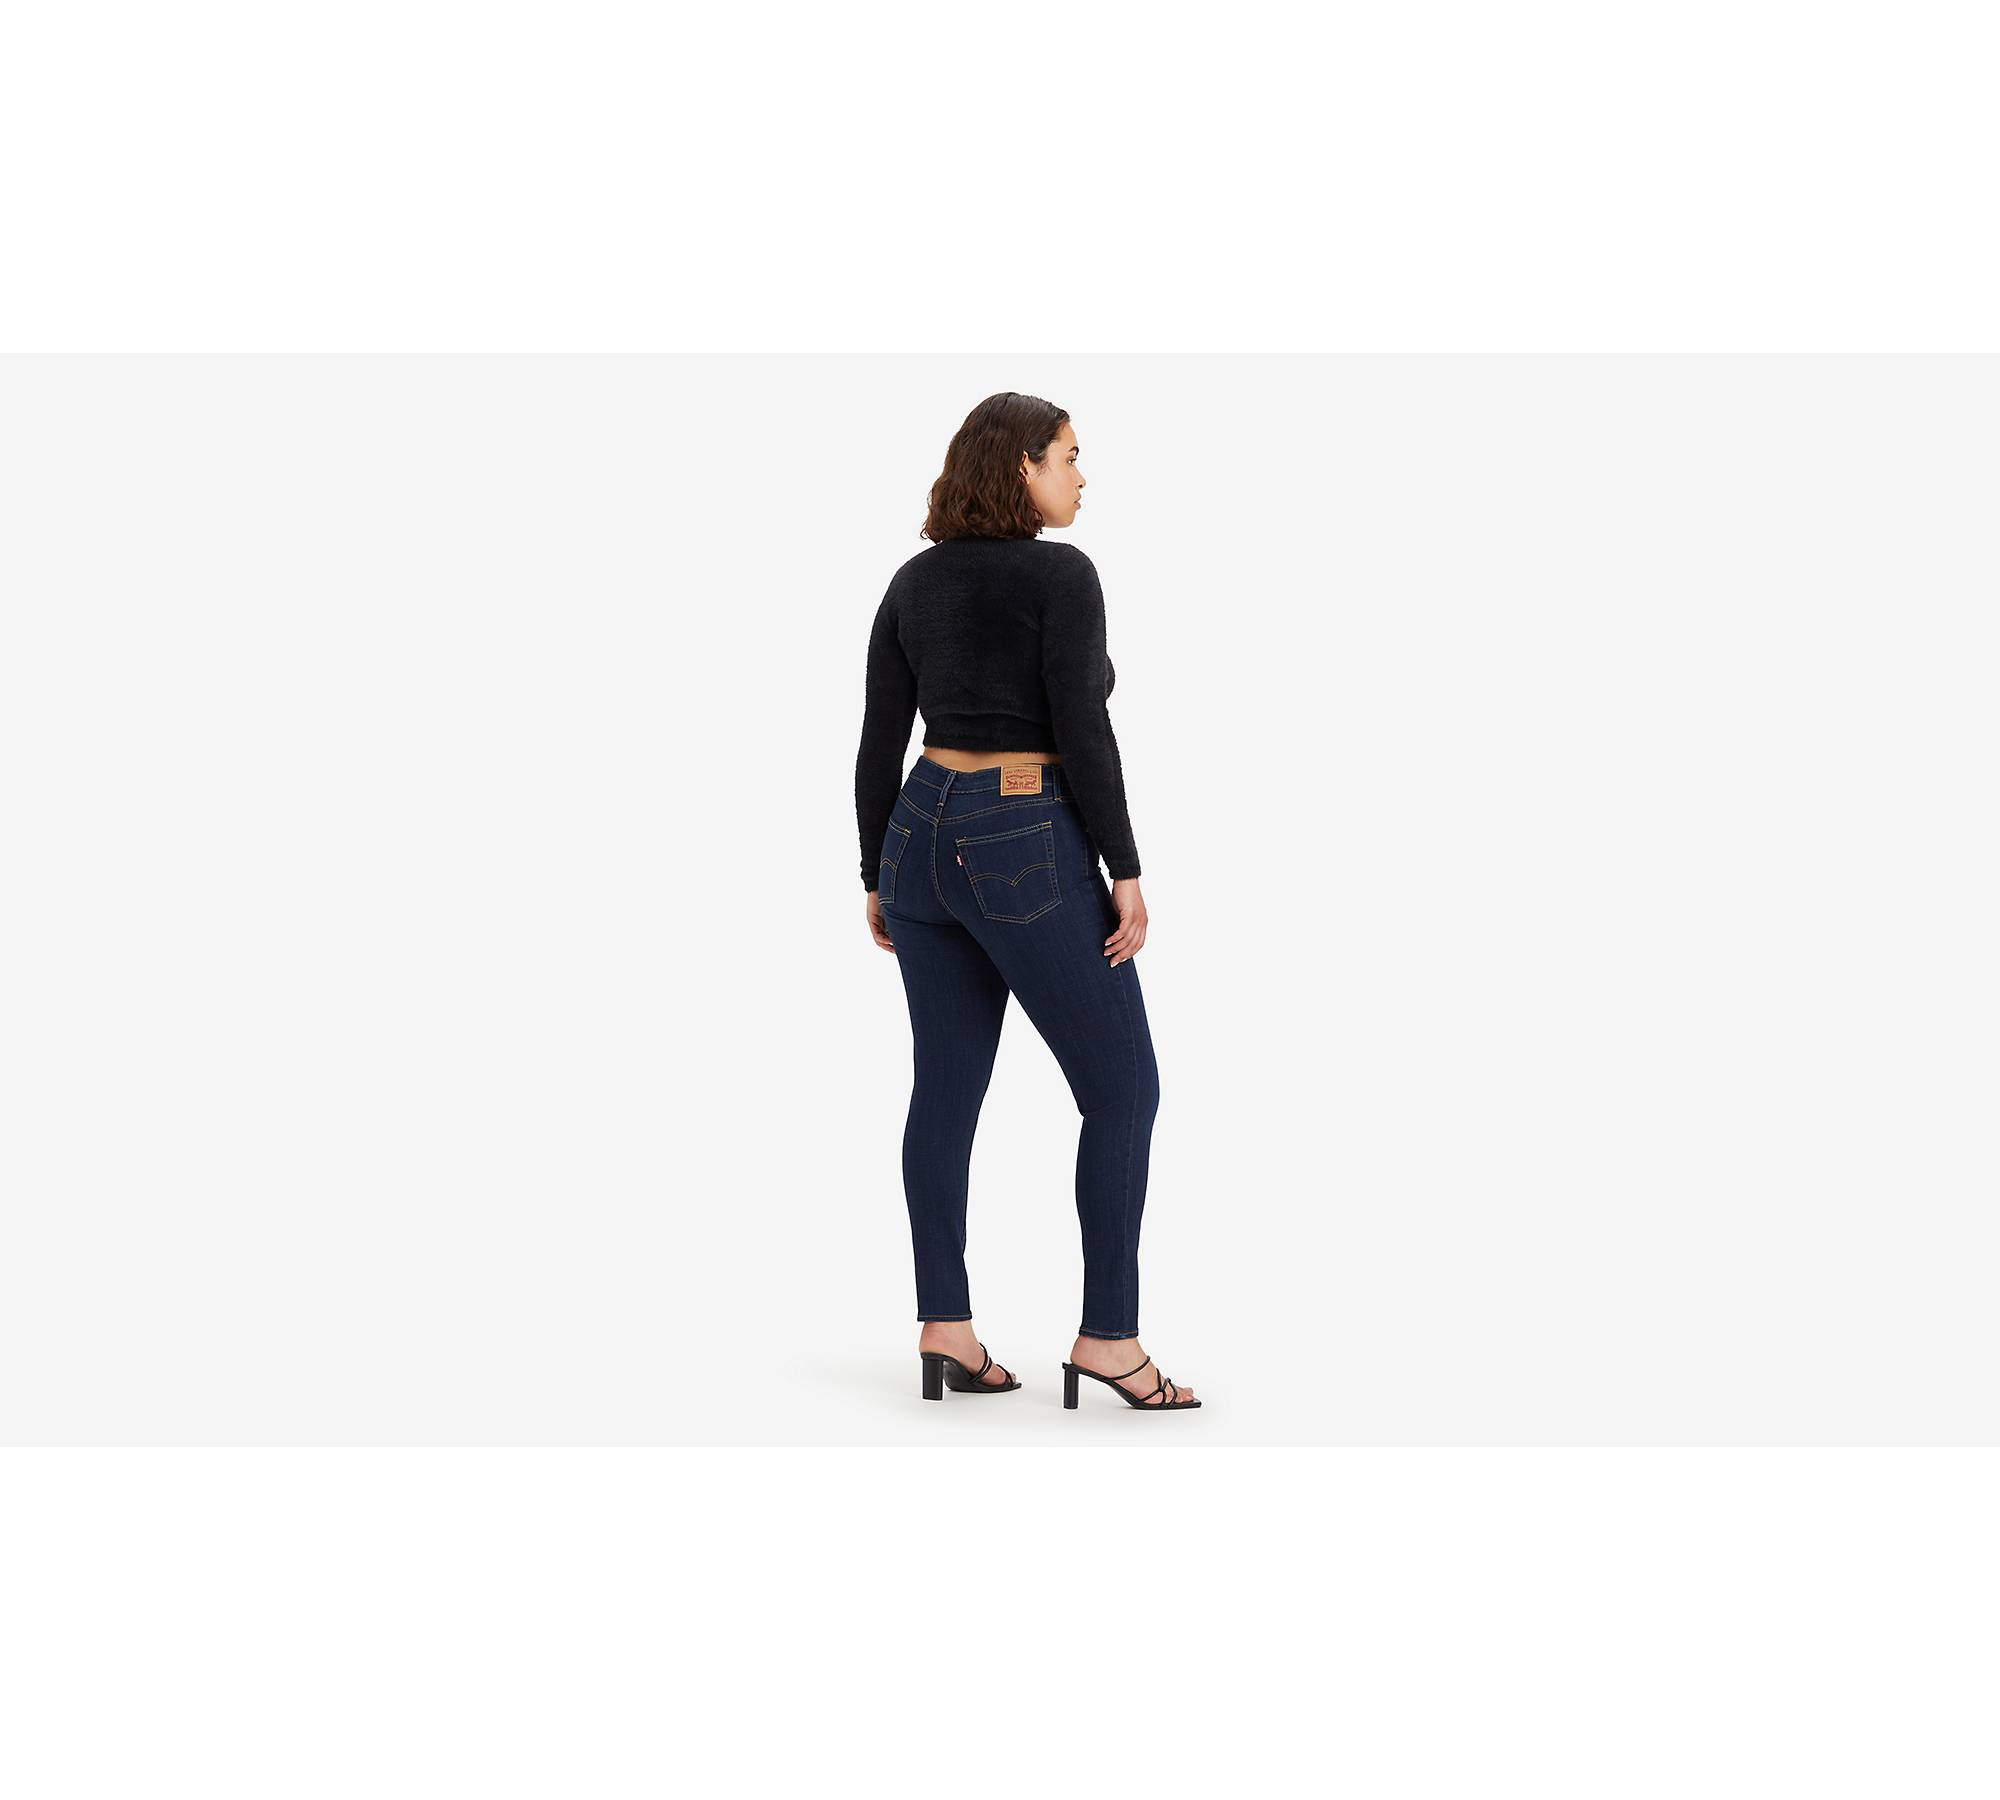 Women Ladies Black Blue High Waisted Skinny jeans size 6 8 10 12 14 16